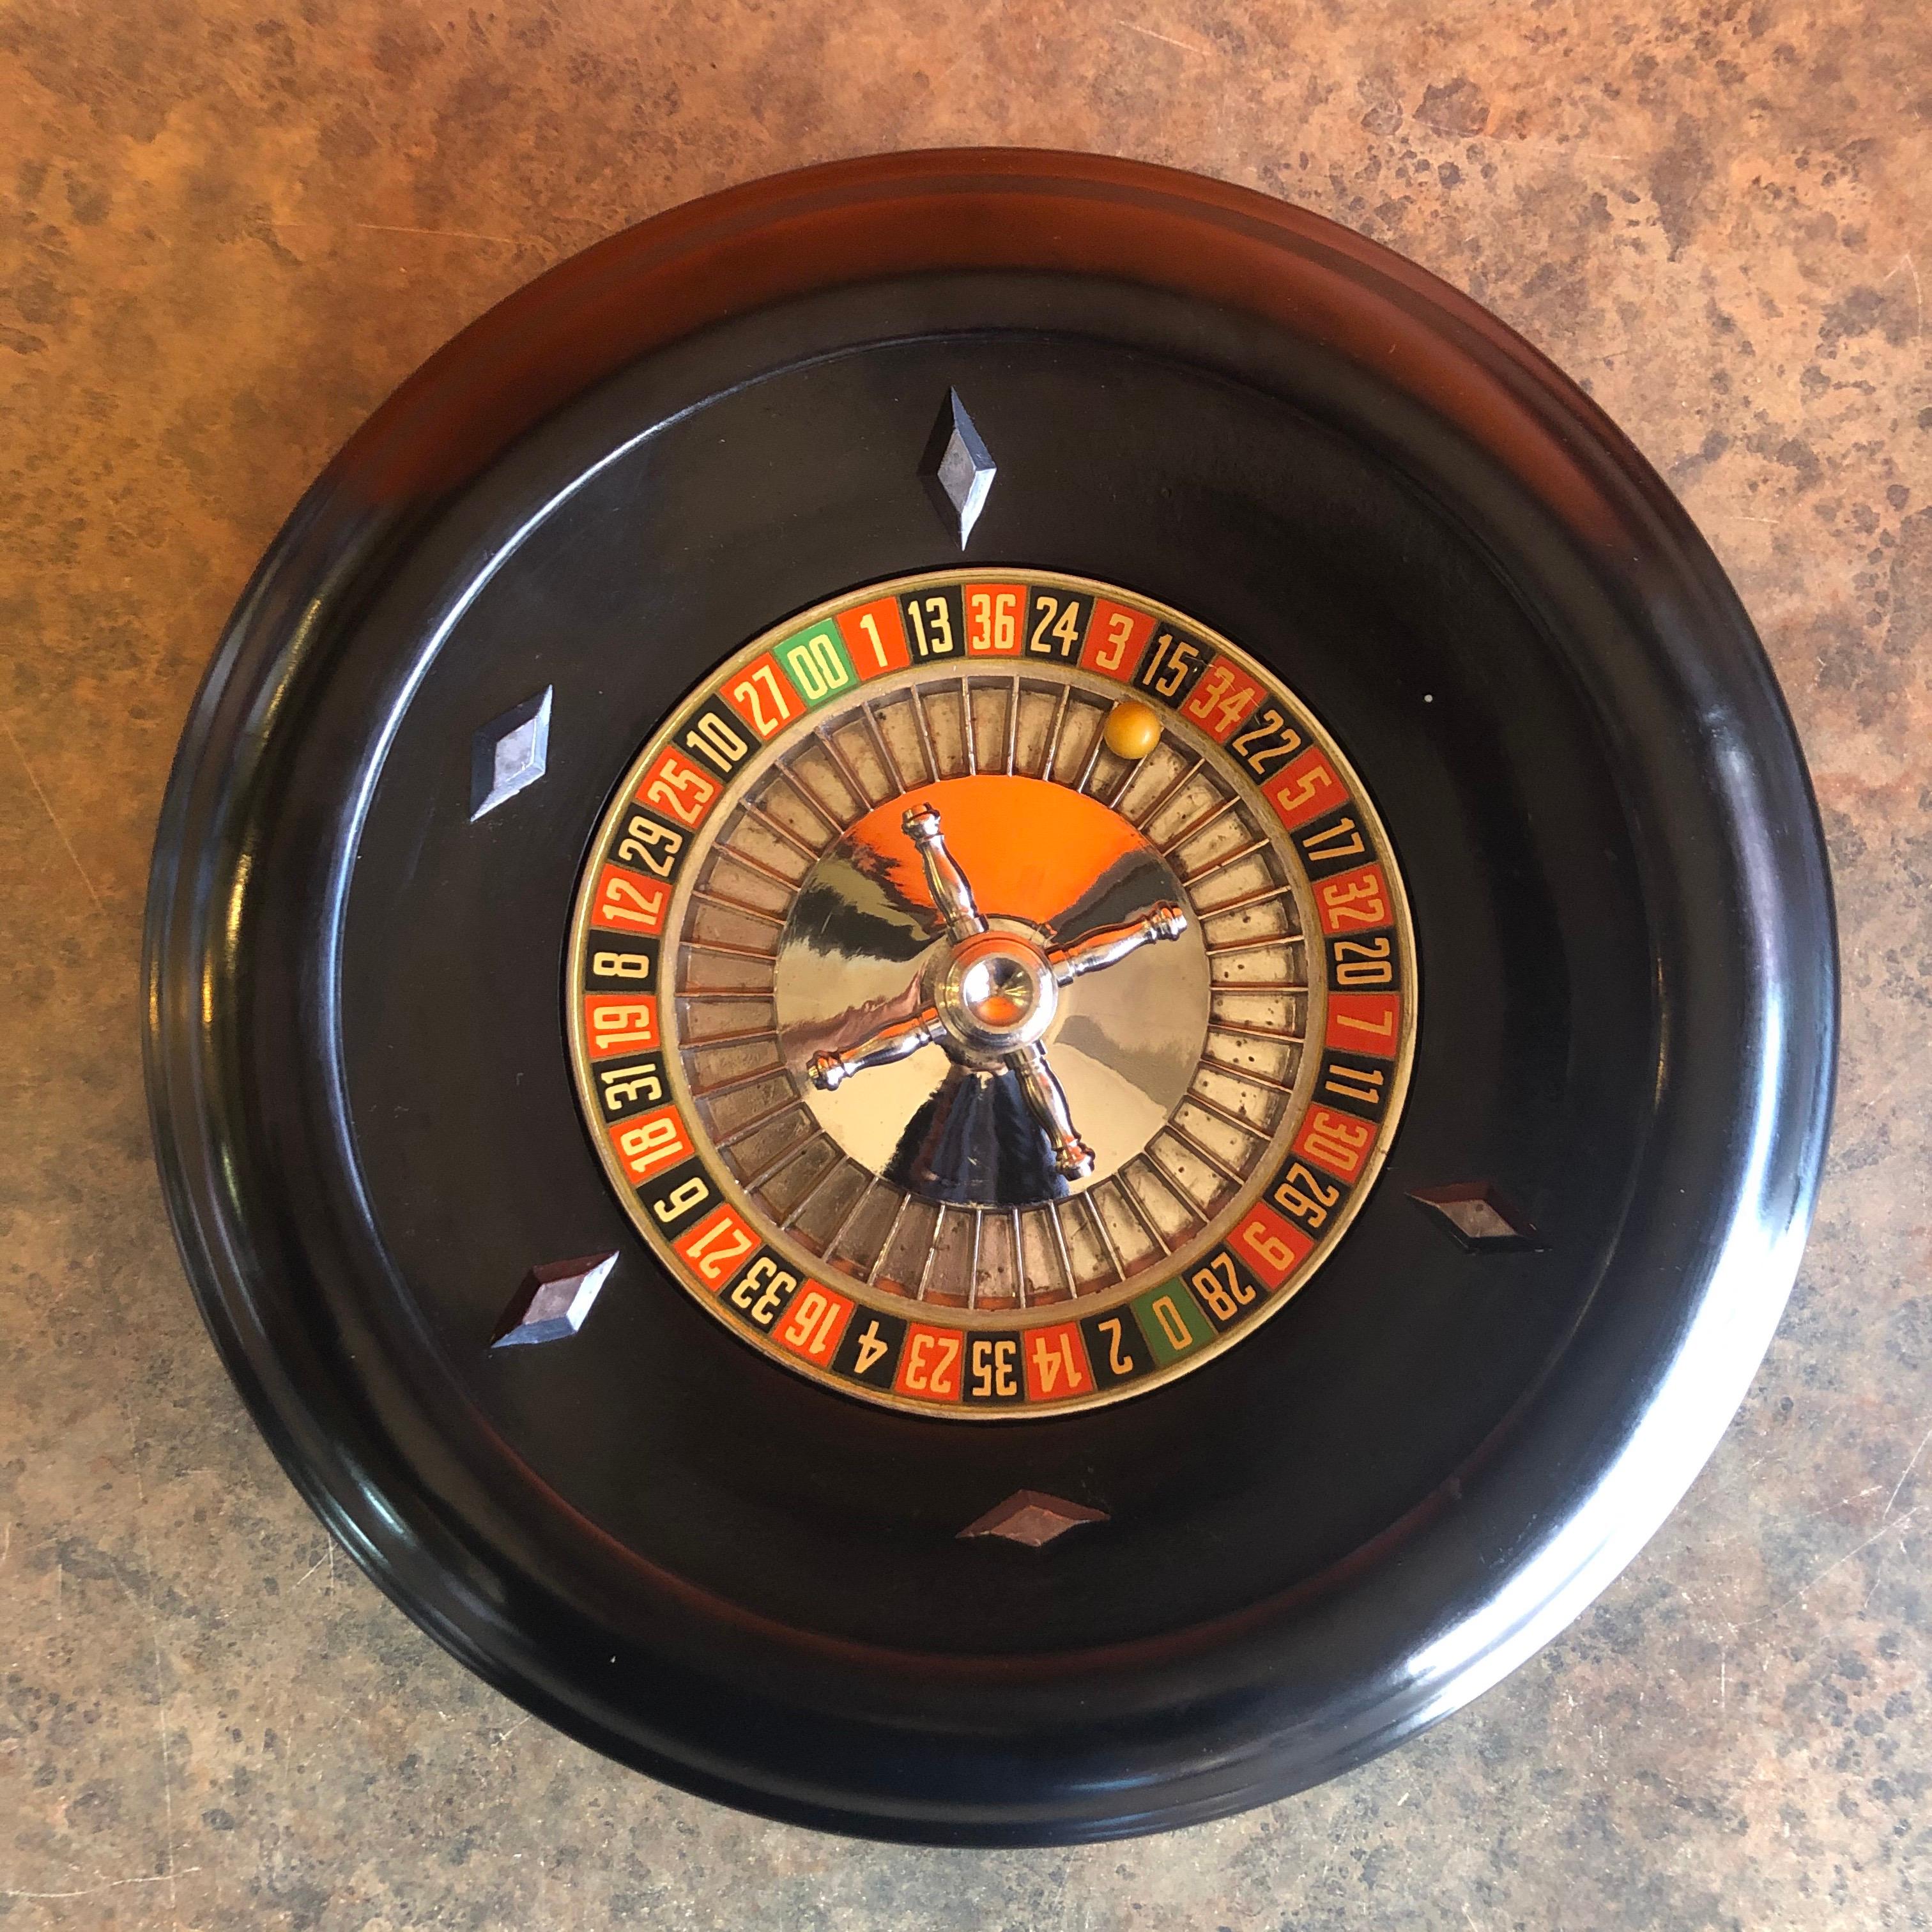 Vintage bakelite roulette wheel by Rottgames, circa 1940s. The wheel is 12